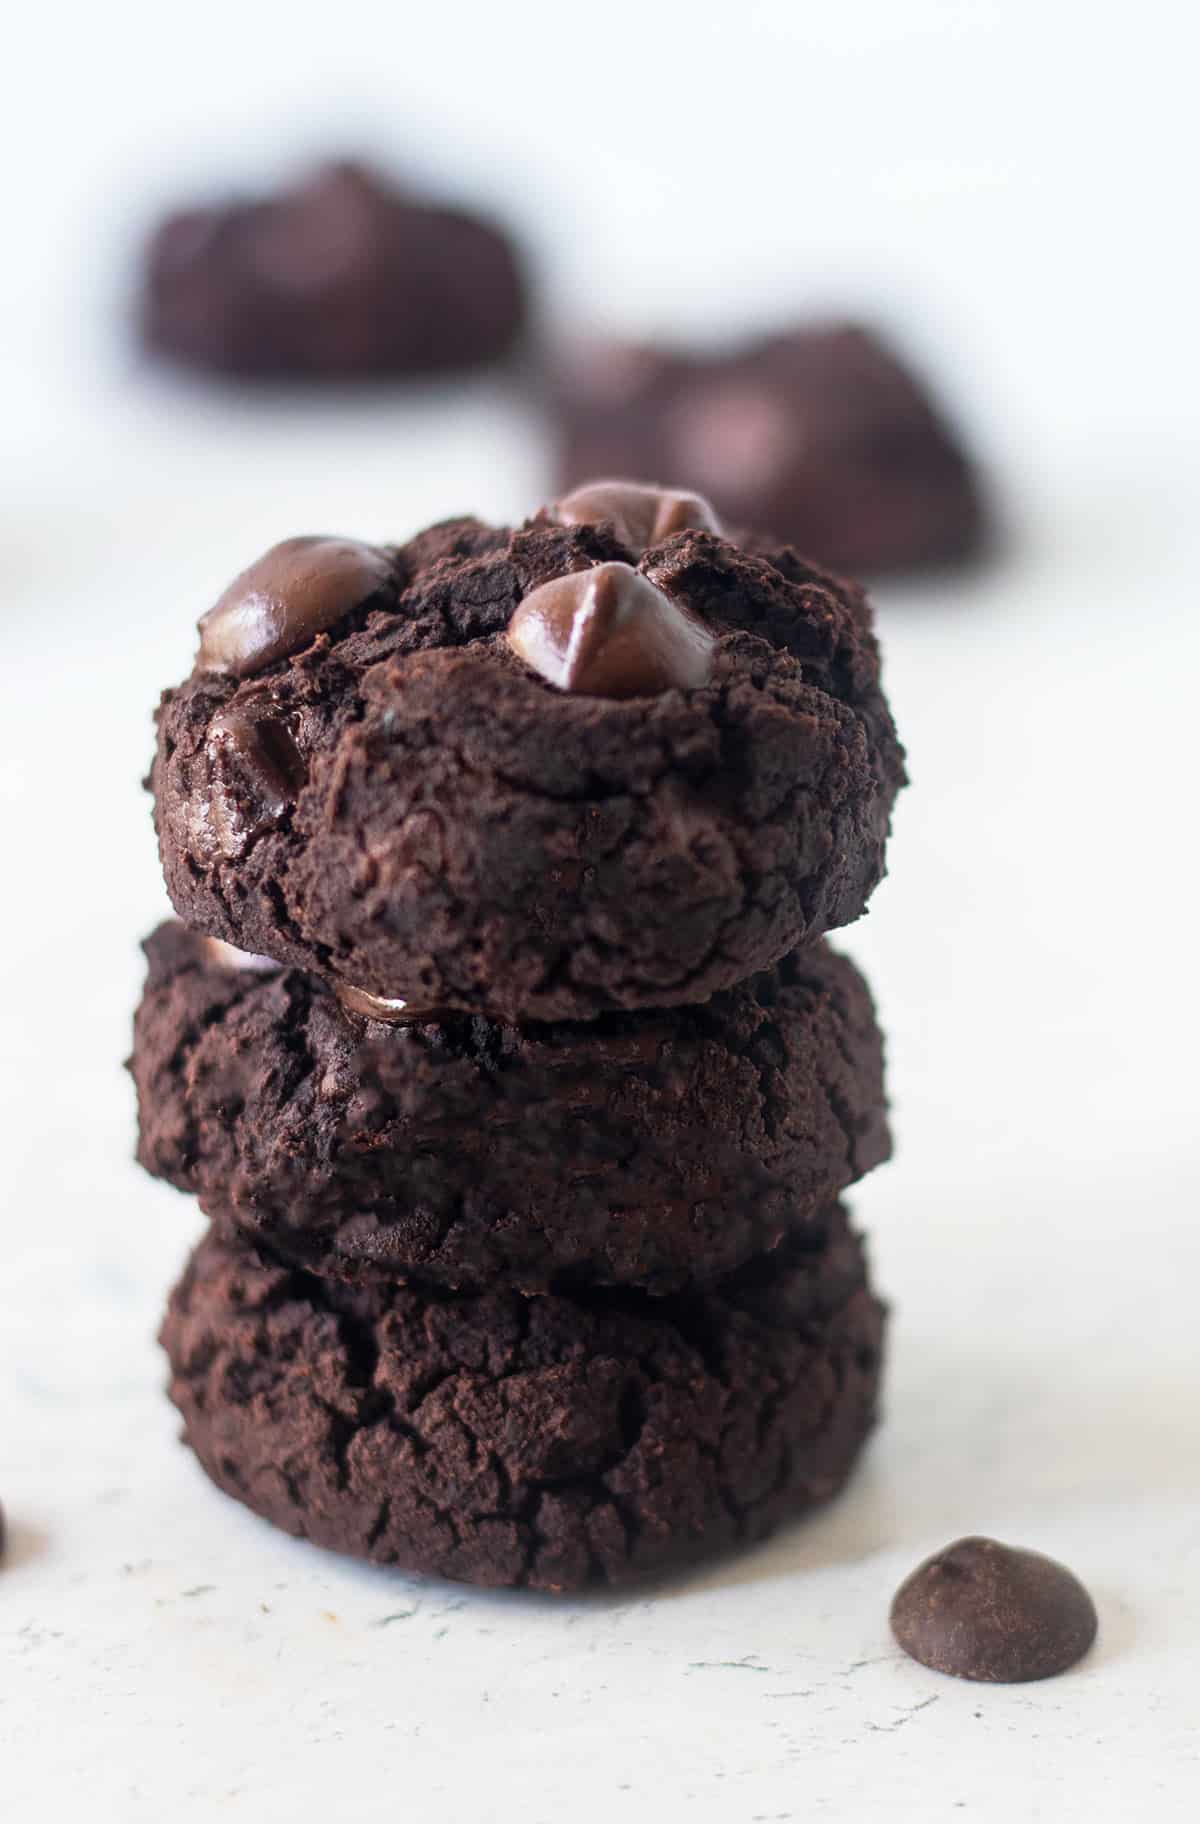 Three Black bean cookies stacked on top of each other and topped with extra chocolate chips.